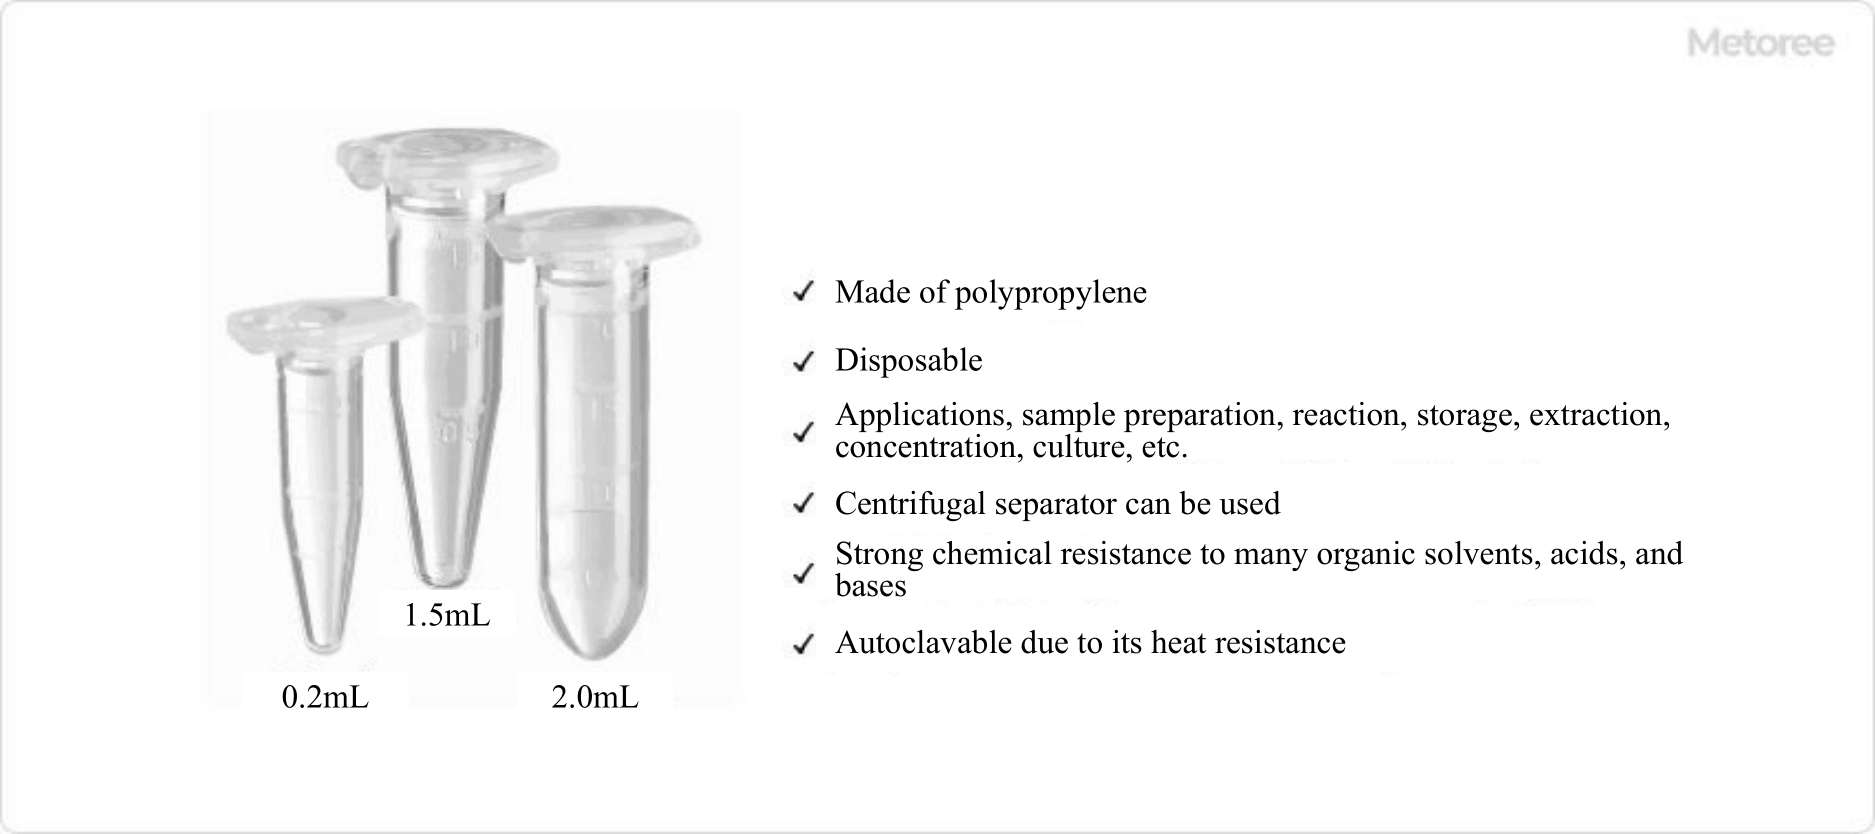 Figure 1. Overview of microtubes